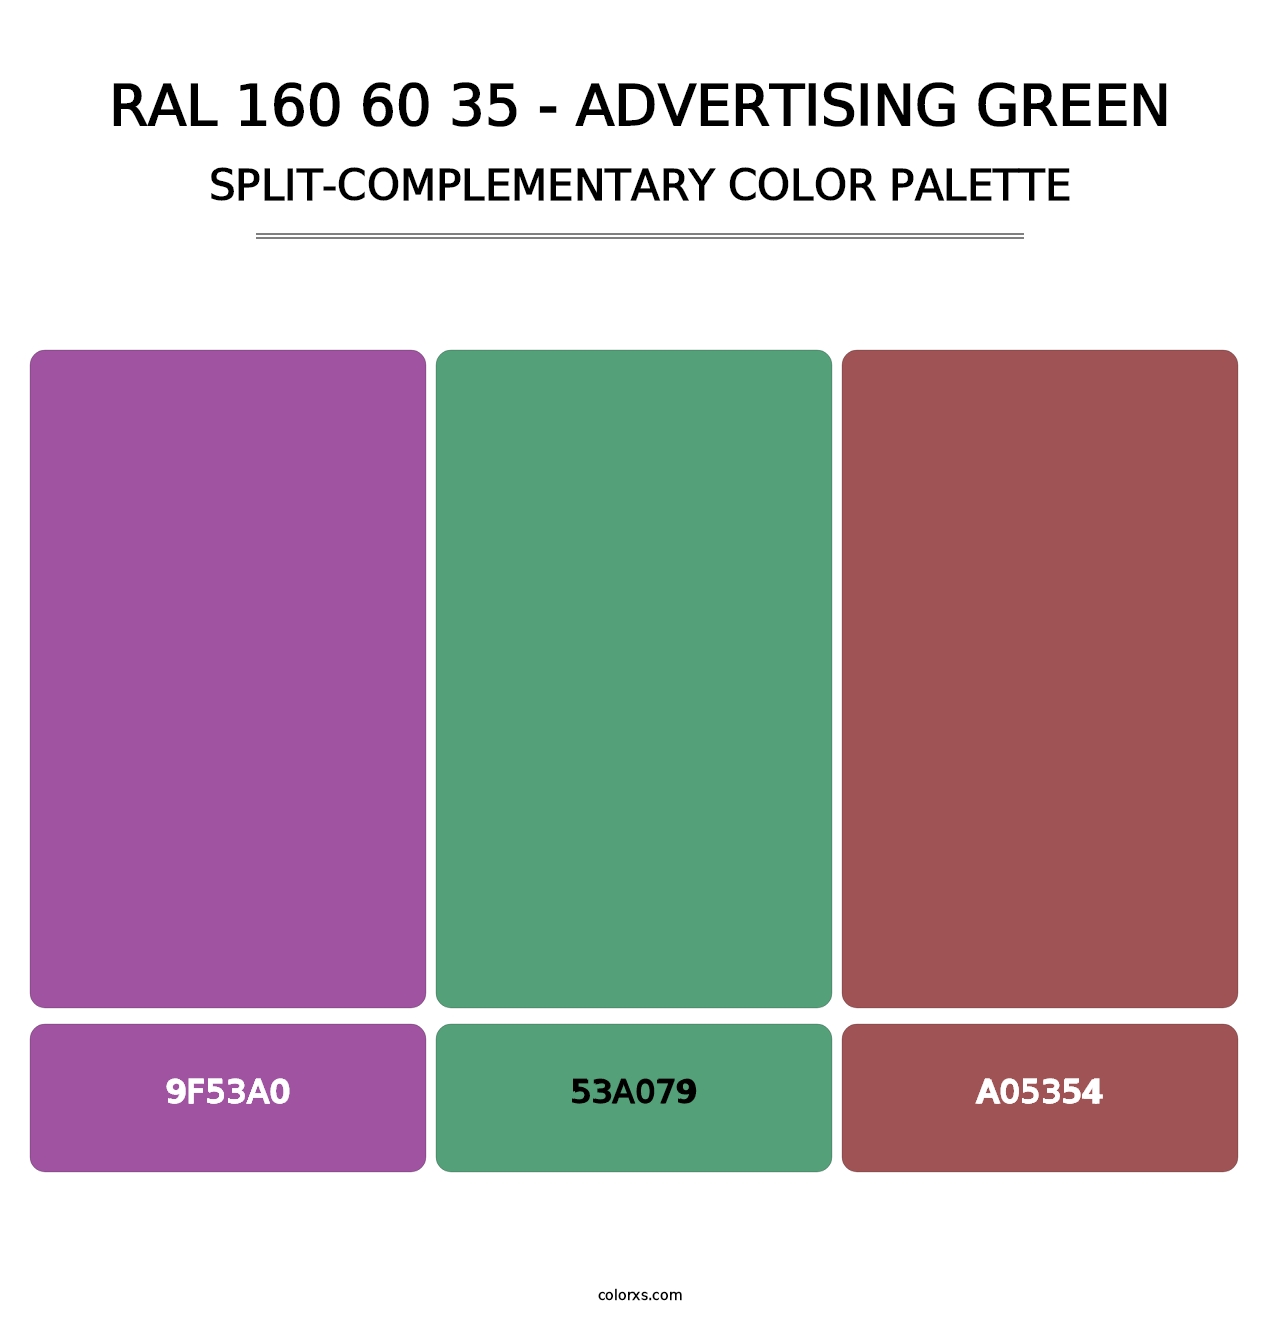 RAL 160 60 35 - Advertising Green - Split-Complementary Color Palette